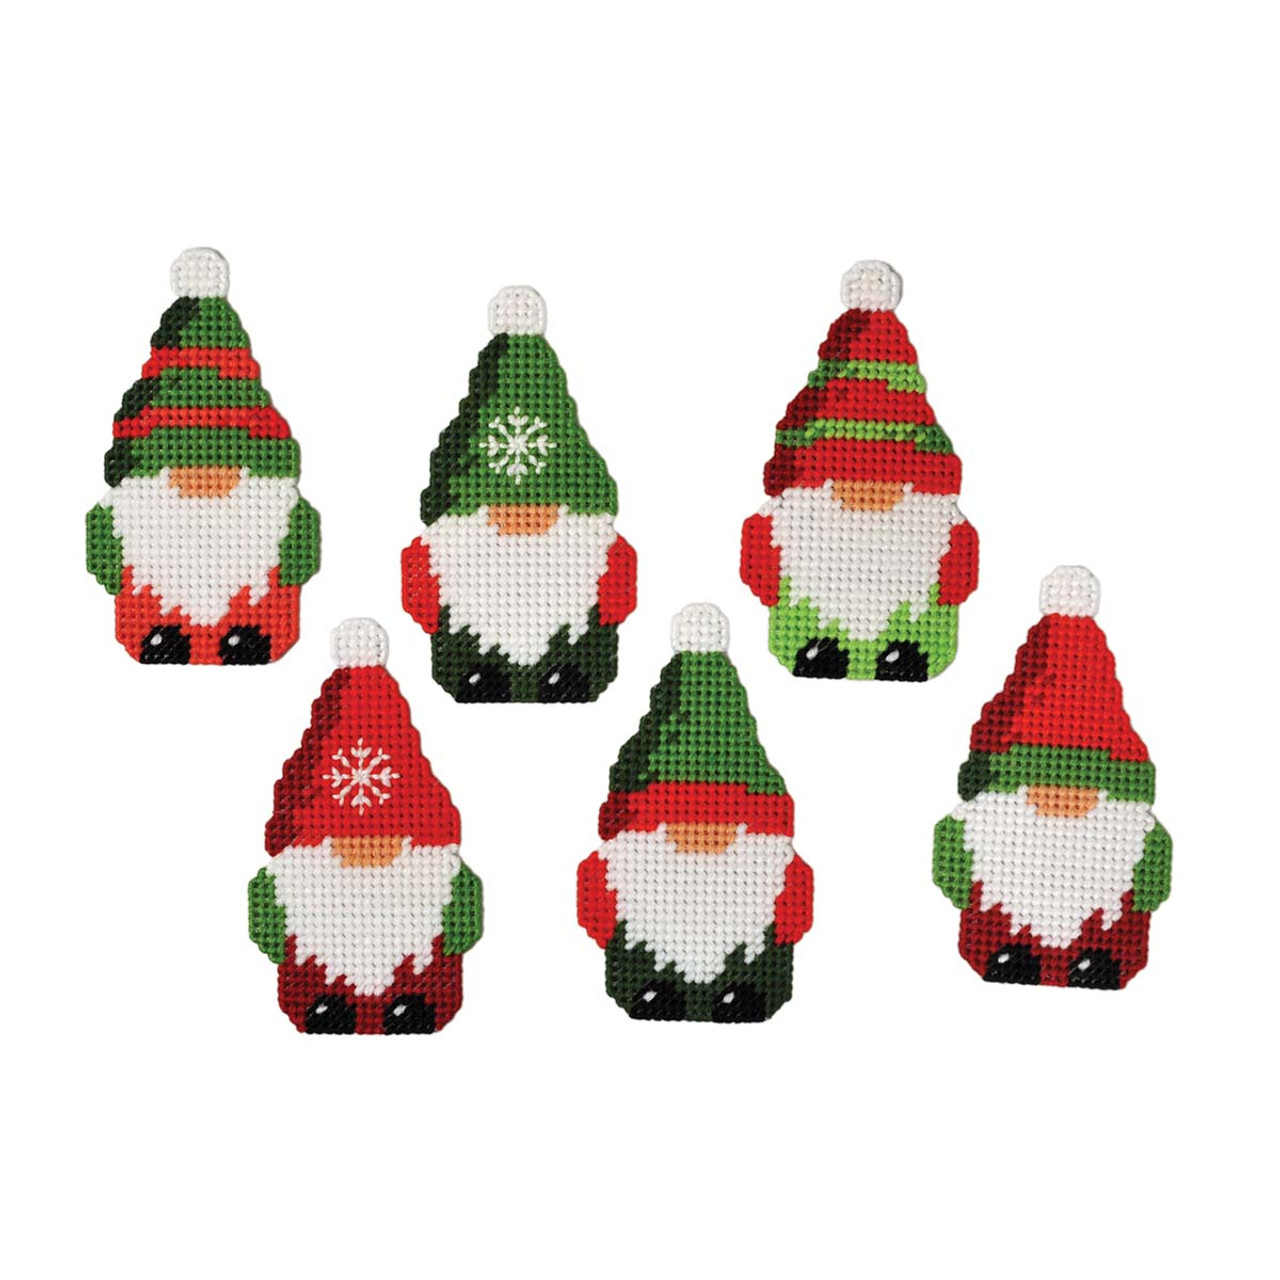 Happy Holidays Print, Christmas Gnome, Christmas Decorations, Red